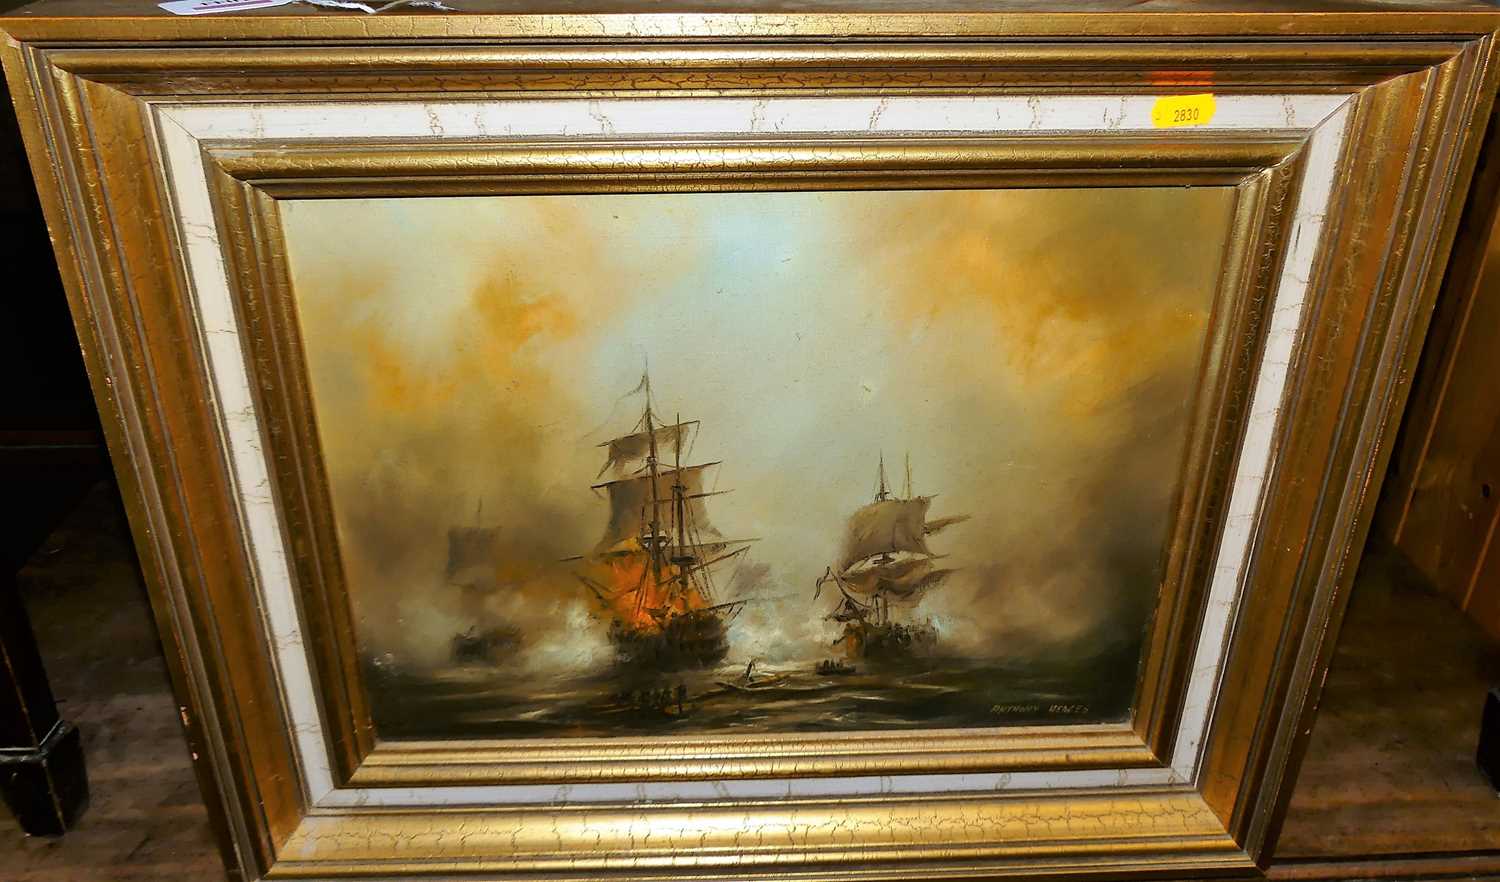 Anthony Hedges - Seascape with clipper ship on fire, oil on canvas, signed lower right, 30x40cm